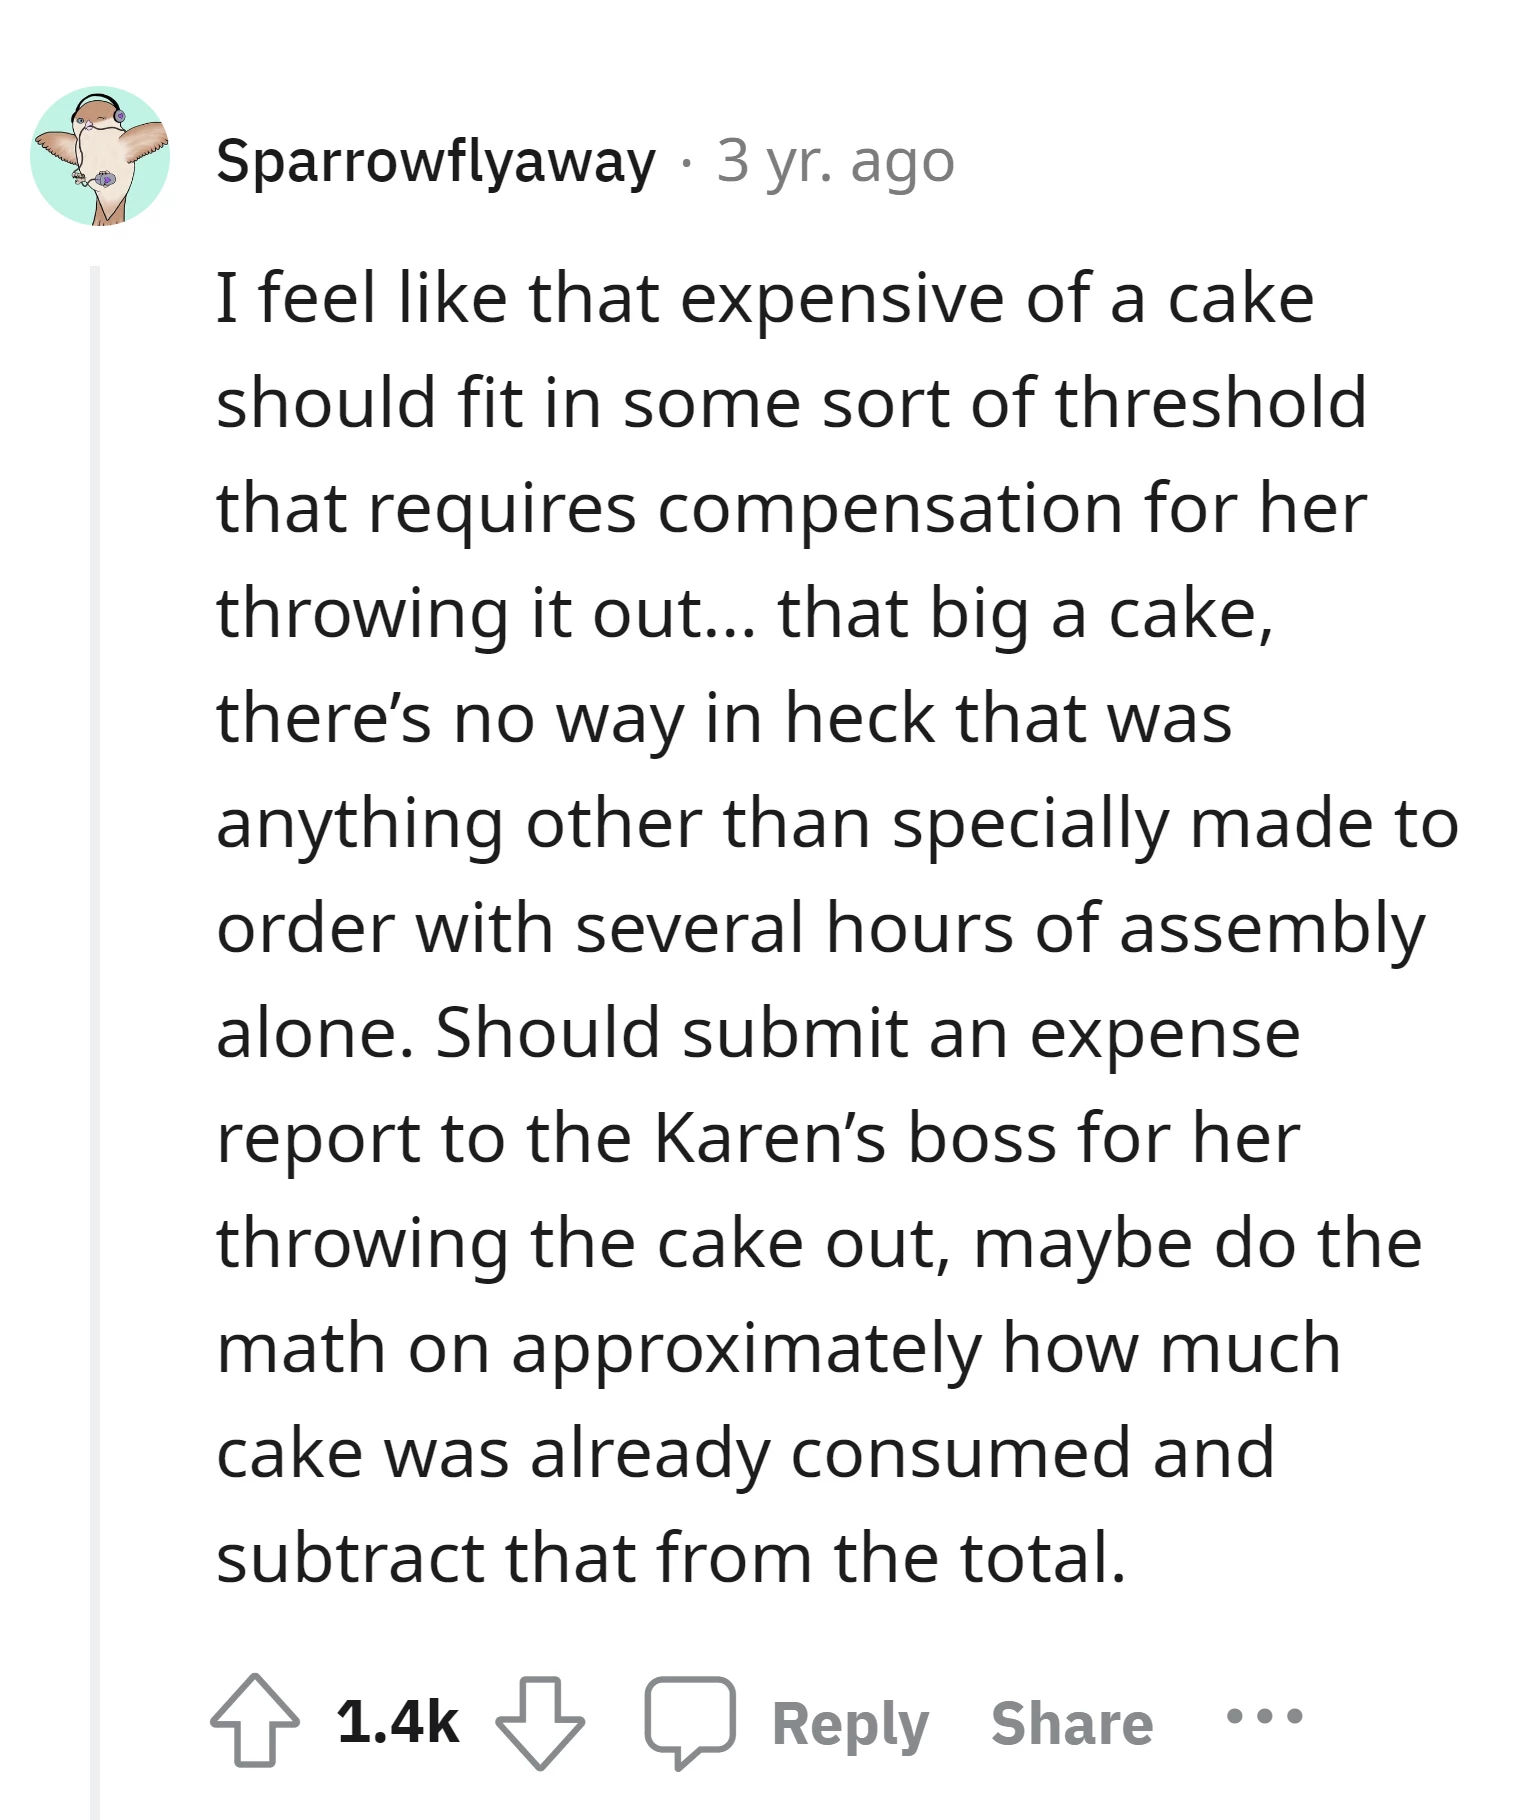 Seek compensation for the expensive cake thrown out by Karen